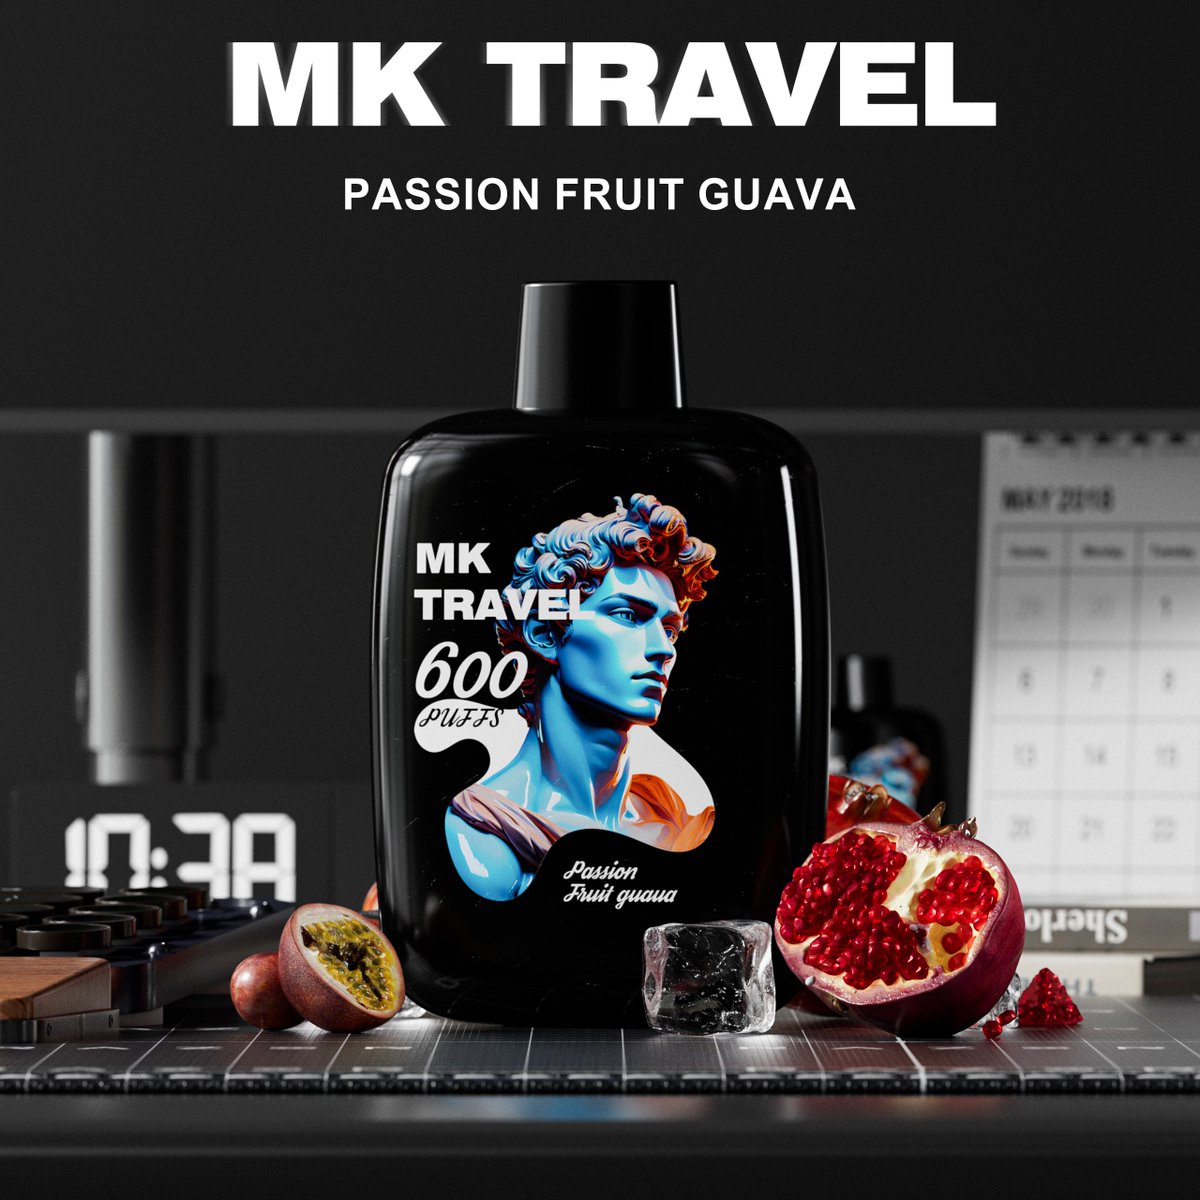 MK Travel 600, Passion Fruit Guava. Accompany all the way. Enjoy anytime. Cartridge Mesh Coil. 2ml Nicotine 0-2% - ONLY 21+🚭 #mckesse #vaping #vapelife #disposablevape #vape #vapers #vapenation #vapeuk #vapor #vapelyfe #vapeshop